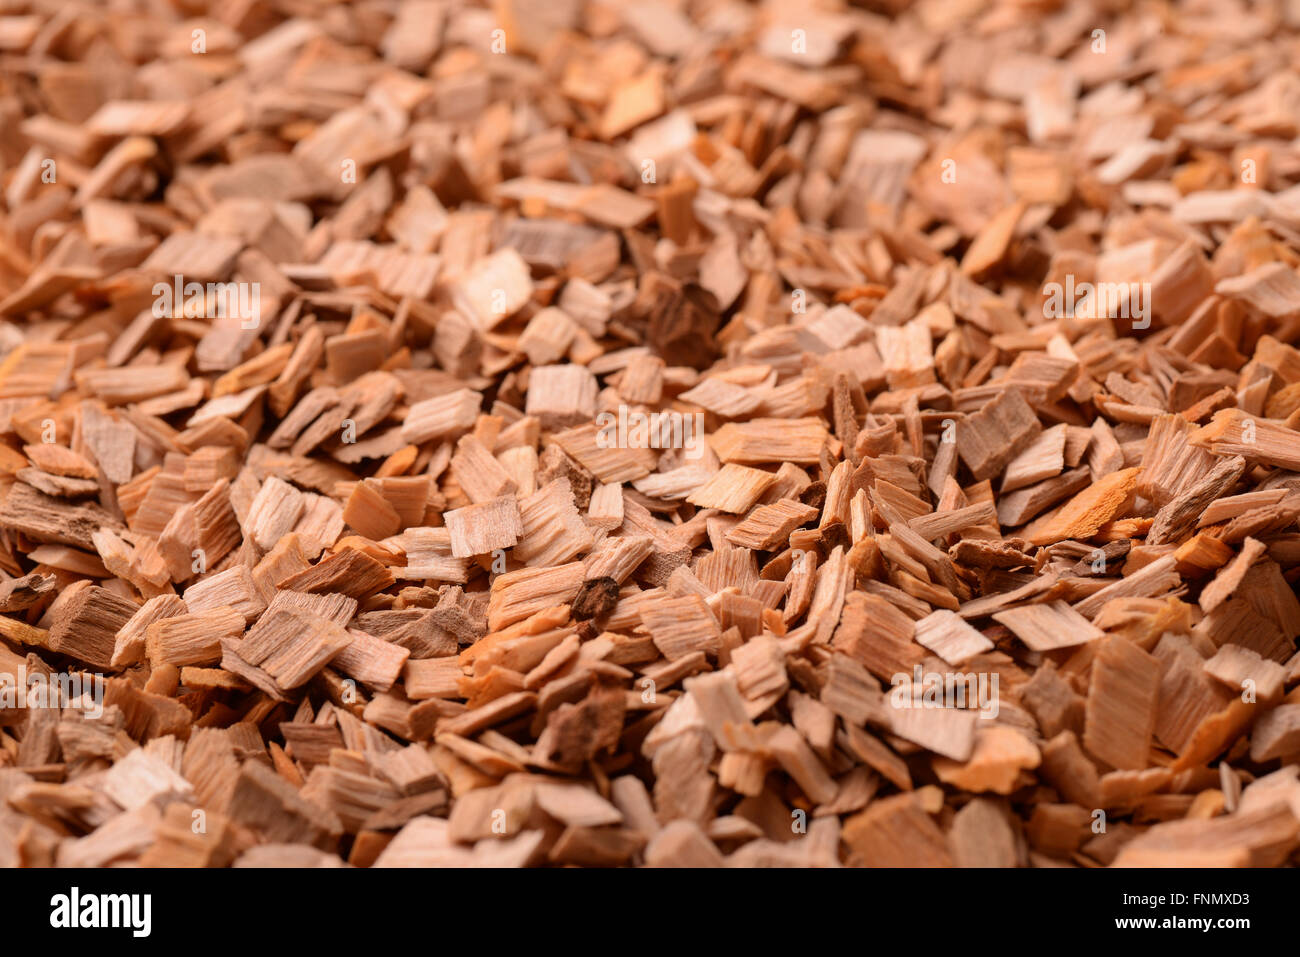 Background of wood chips Stock Photo